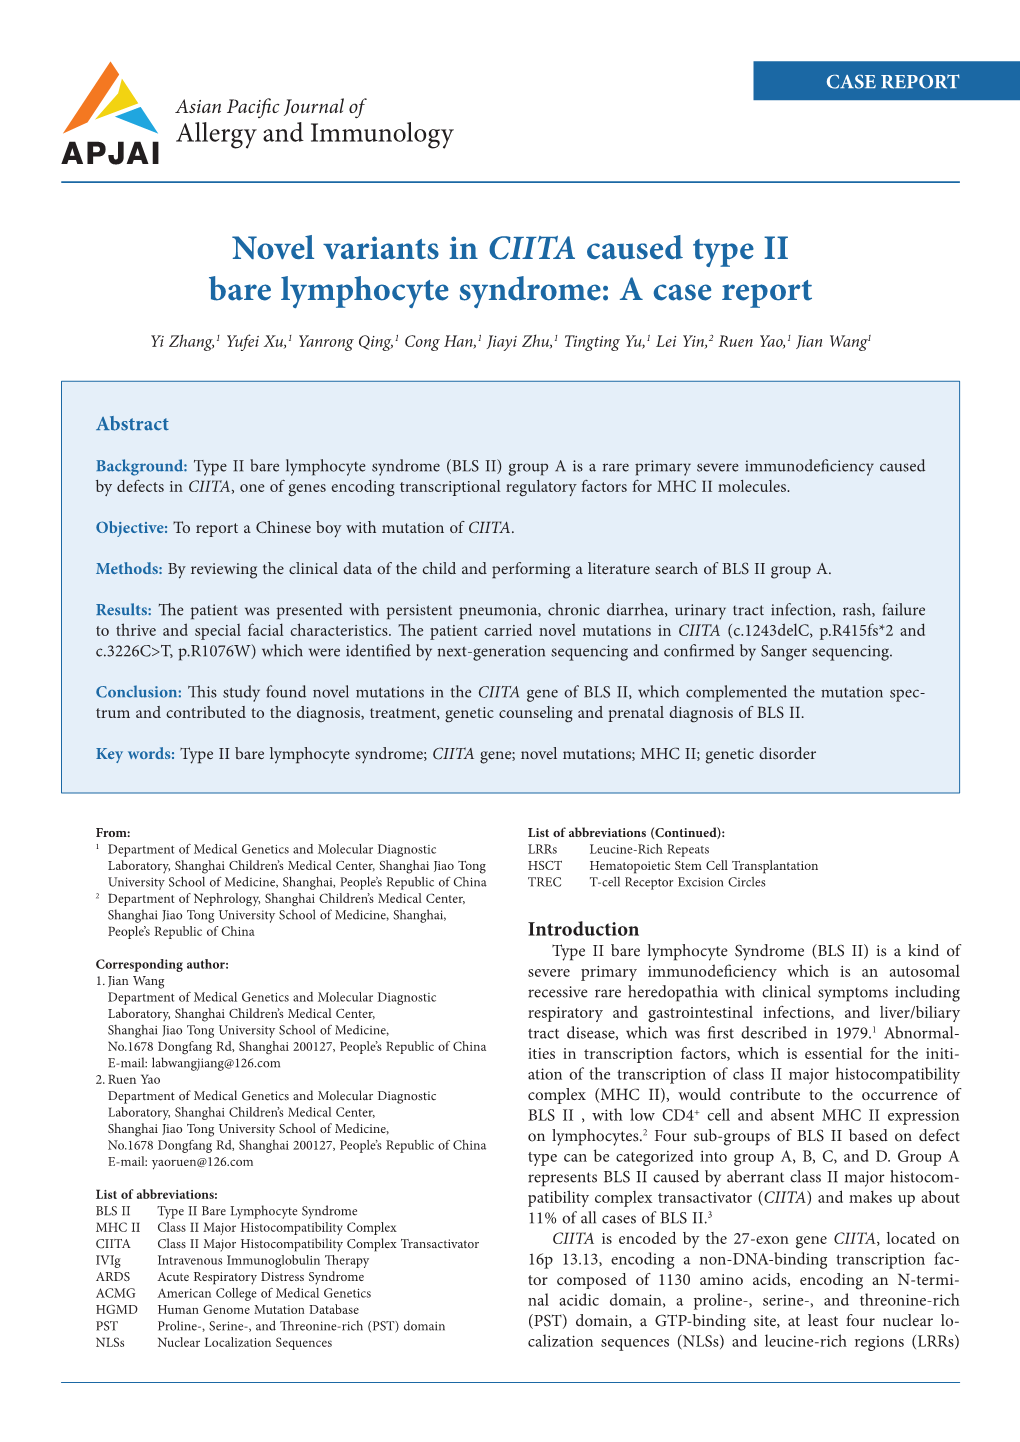 Novel Variants in CIITA Caused Type II Bare Lymphocyte Syndrome: a Case Report